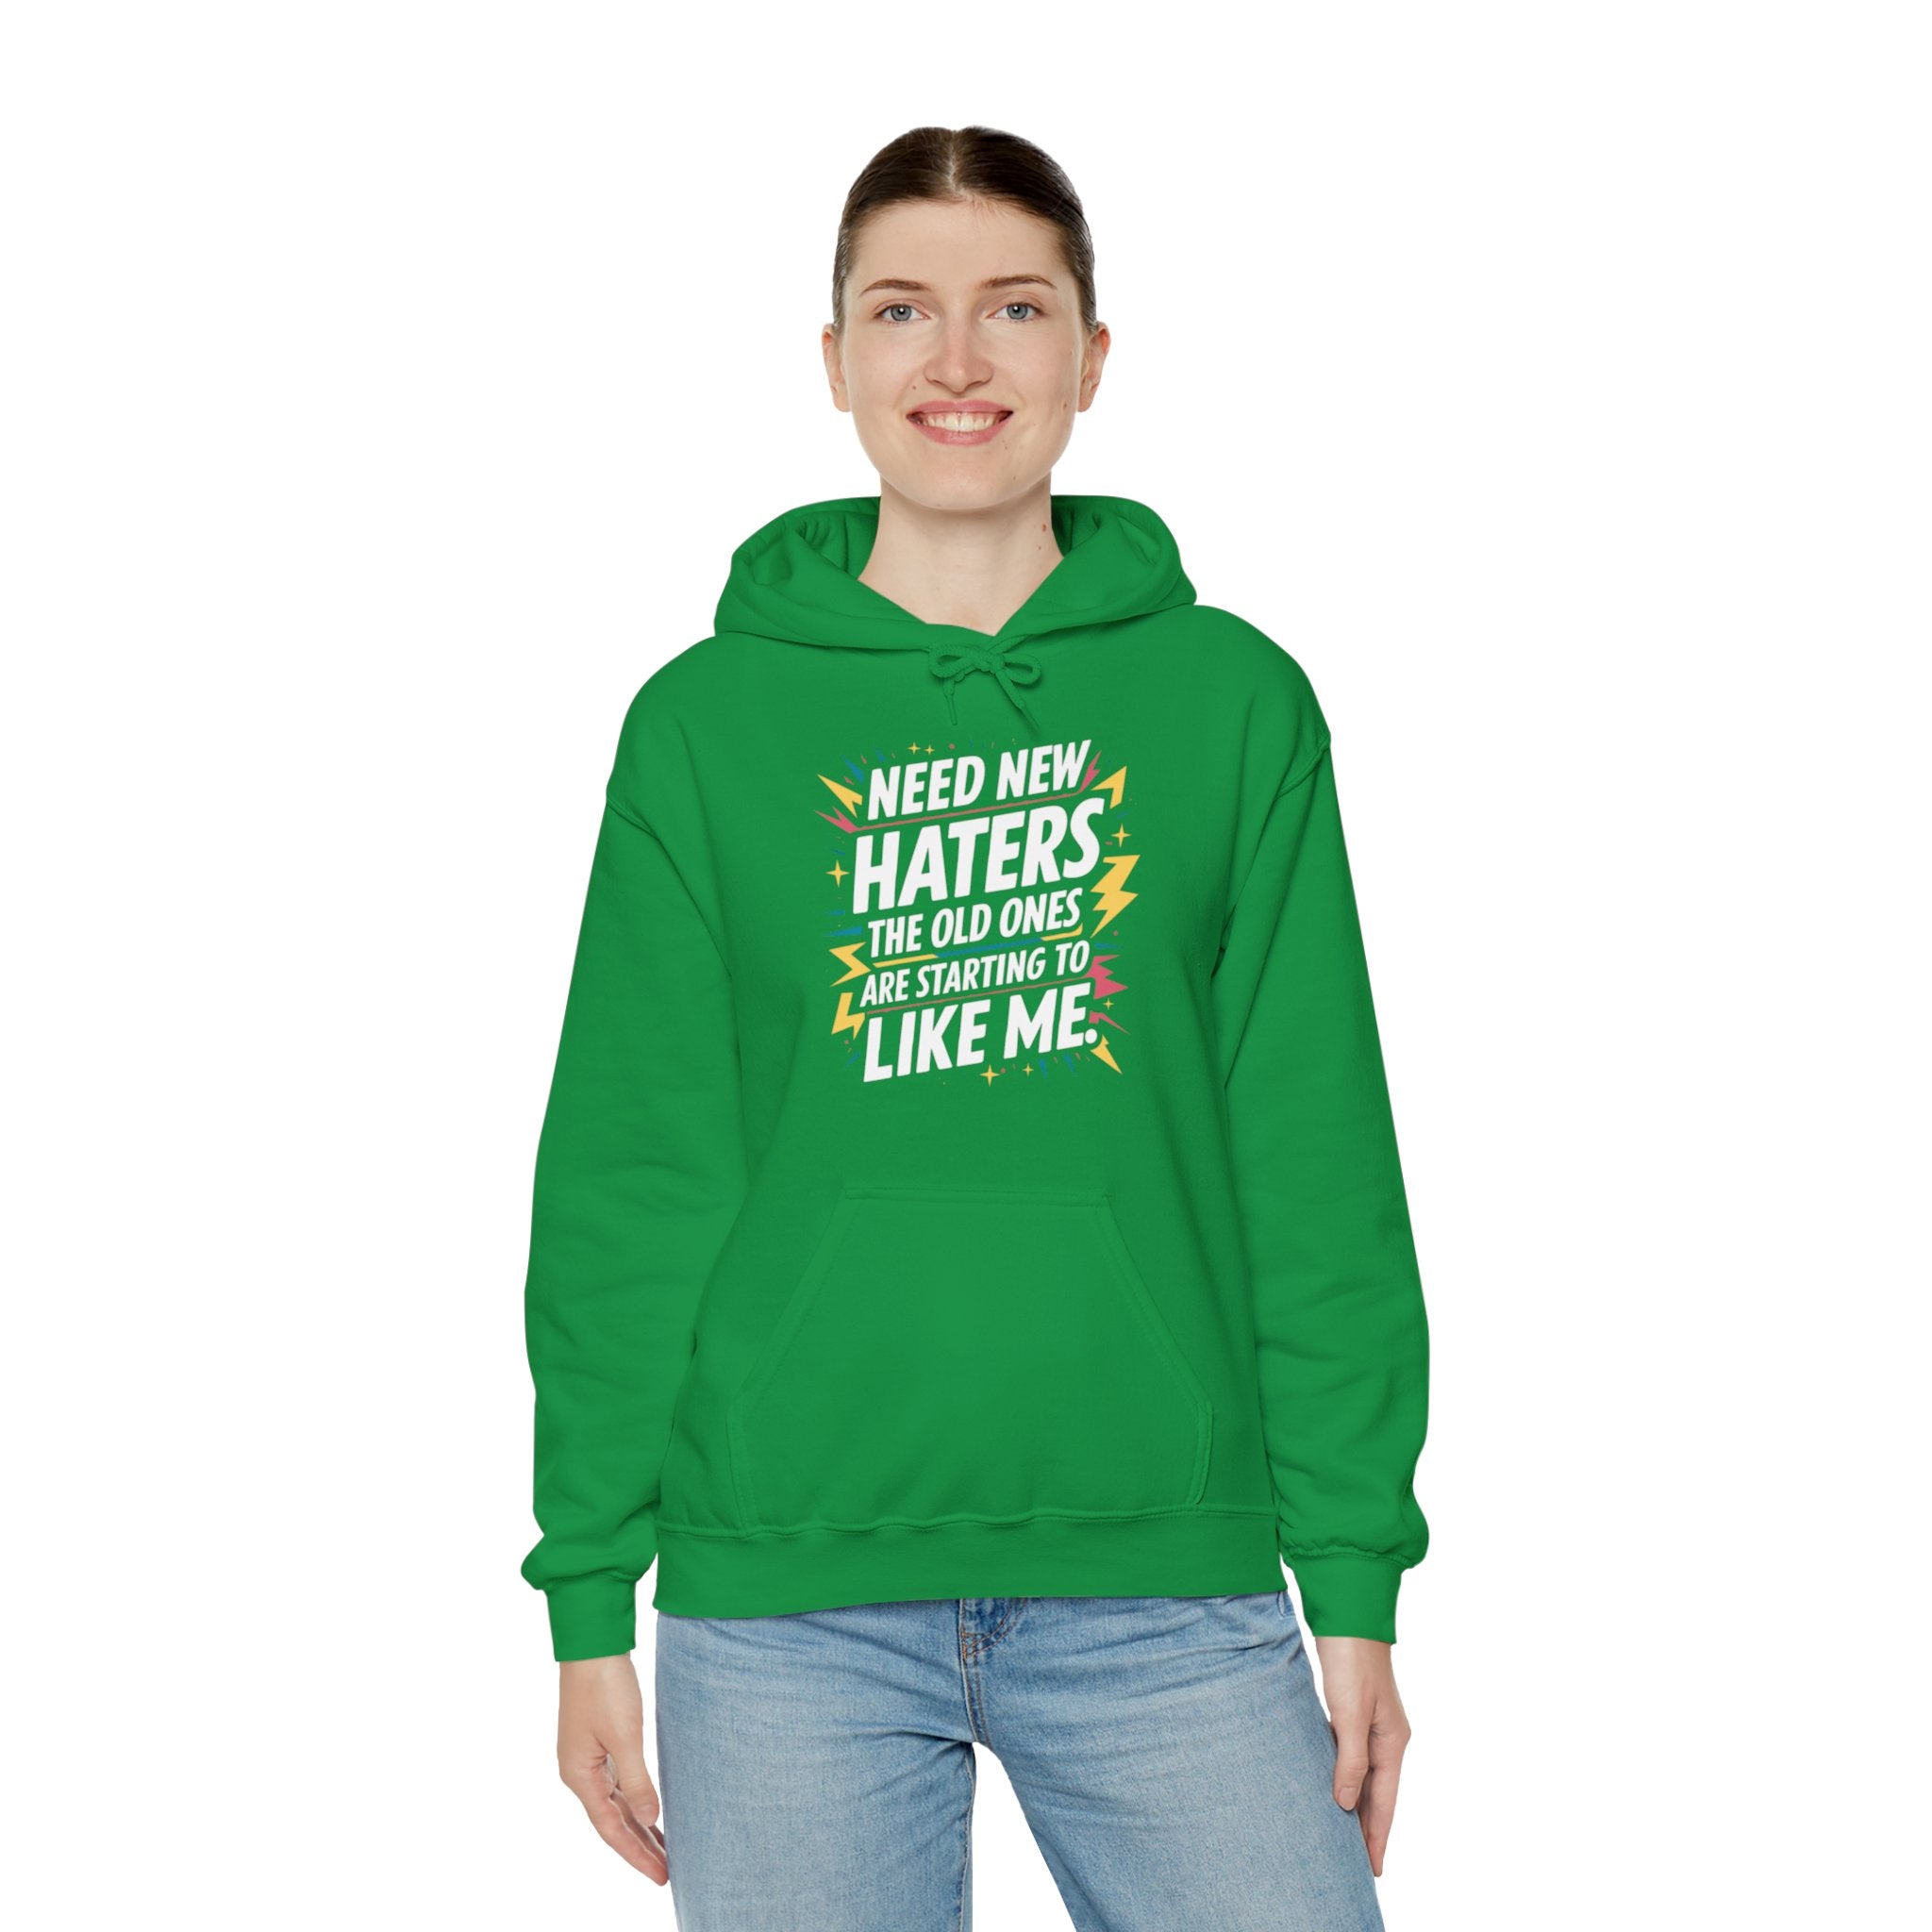 Attitude Hoodie For Women (Haters)